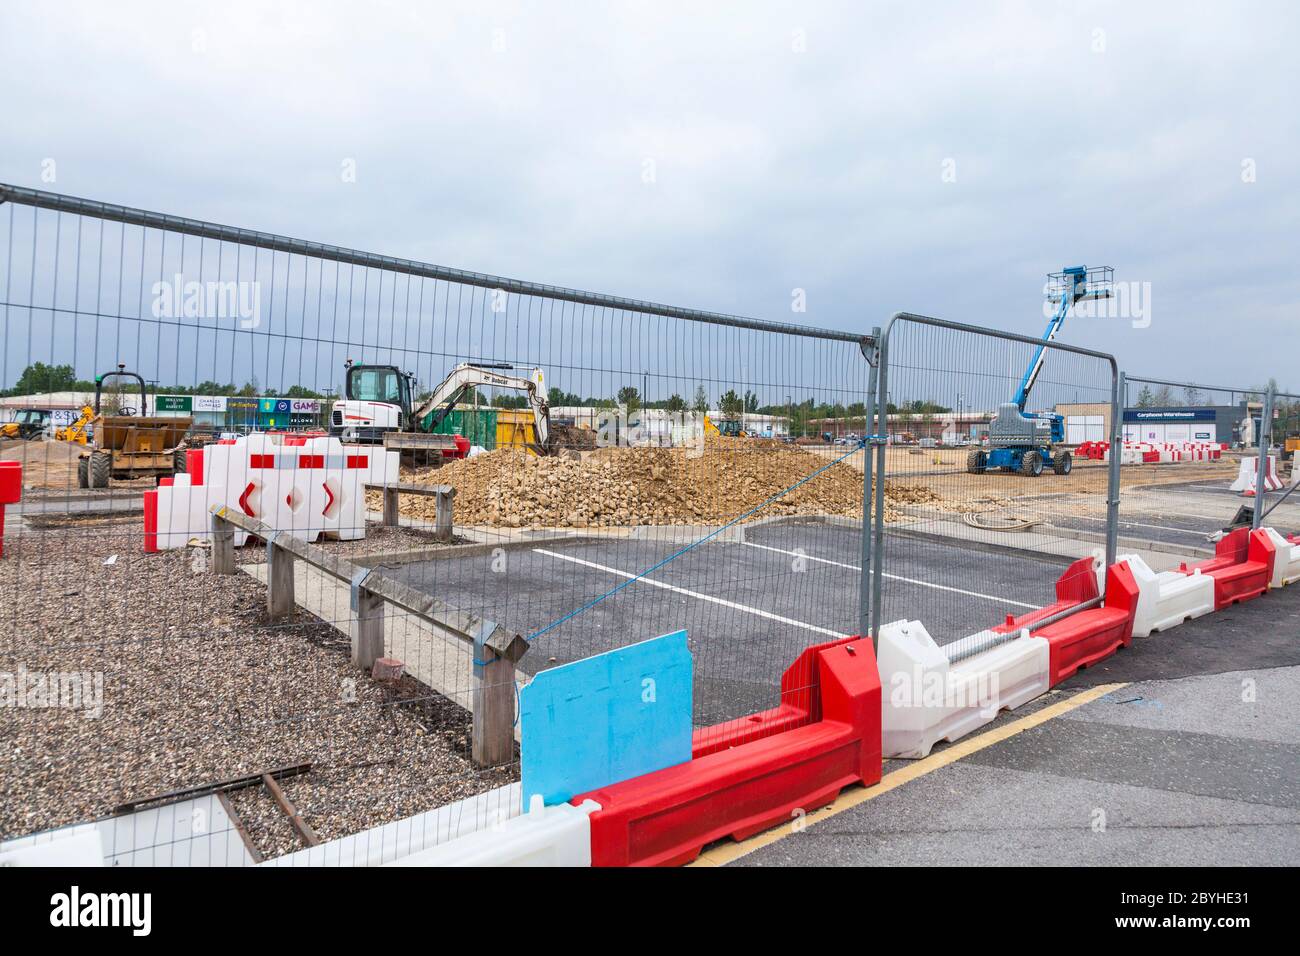 Construction work taking place at Teesside Park, Thornaby, Stockton on Tees, England, UK.Improved car parking facilities and new walkways. Stock Photo